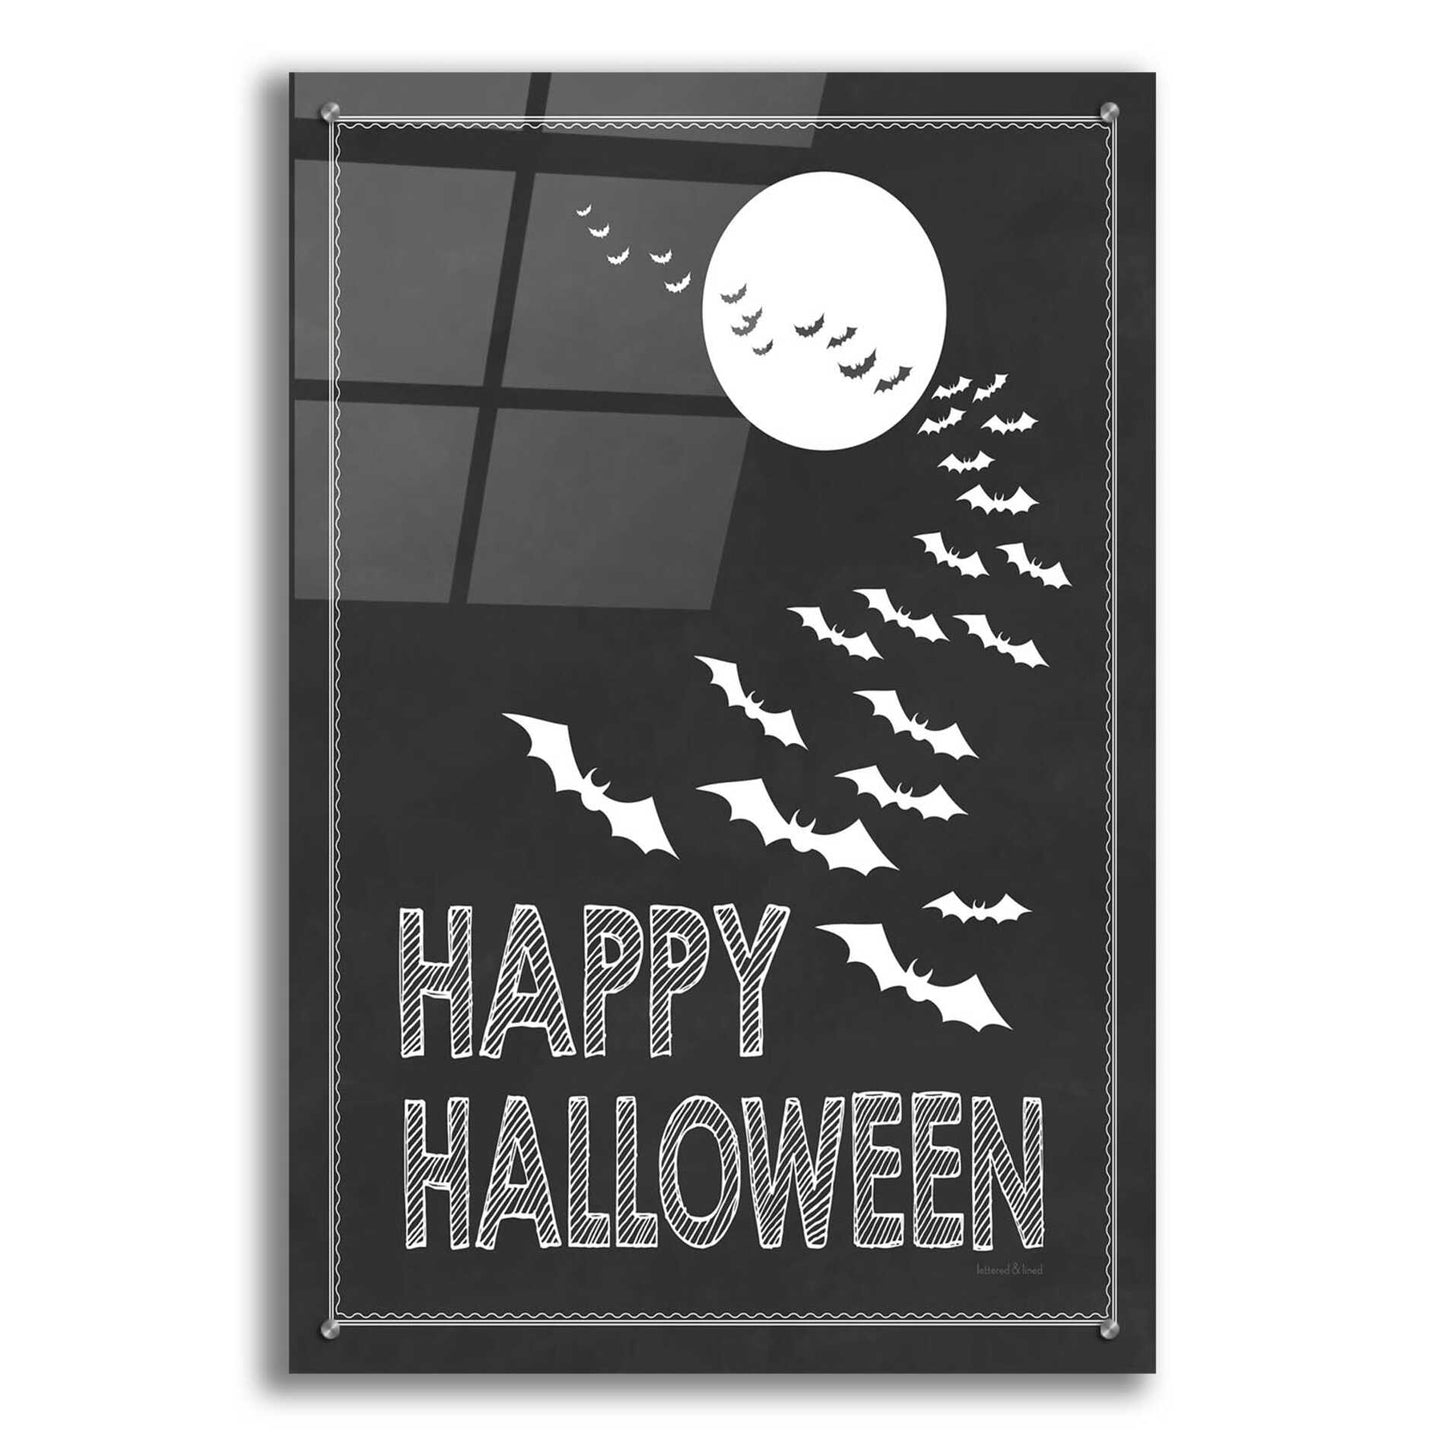 Epic Art 'Happy Halloween' by Lettered & Lined, Acrylic Glass Wall Art,24x36